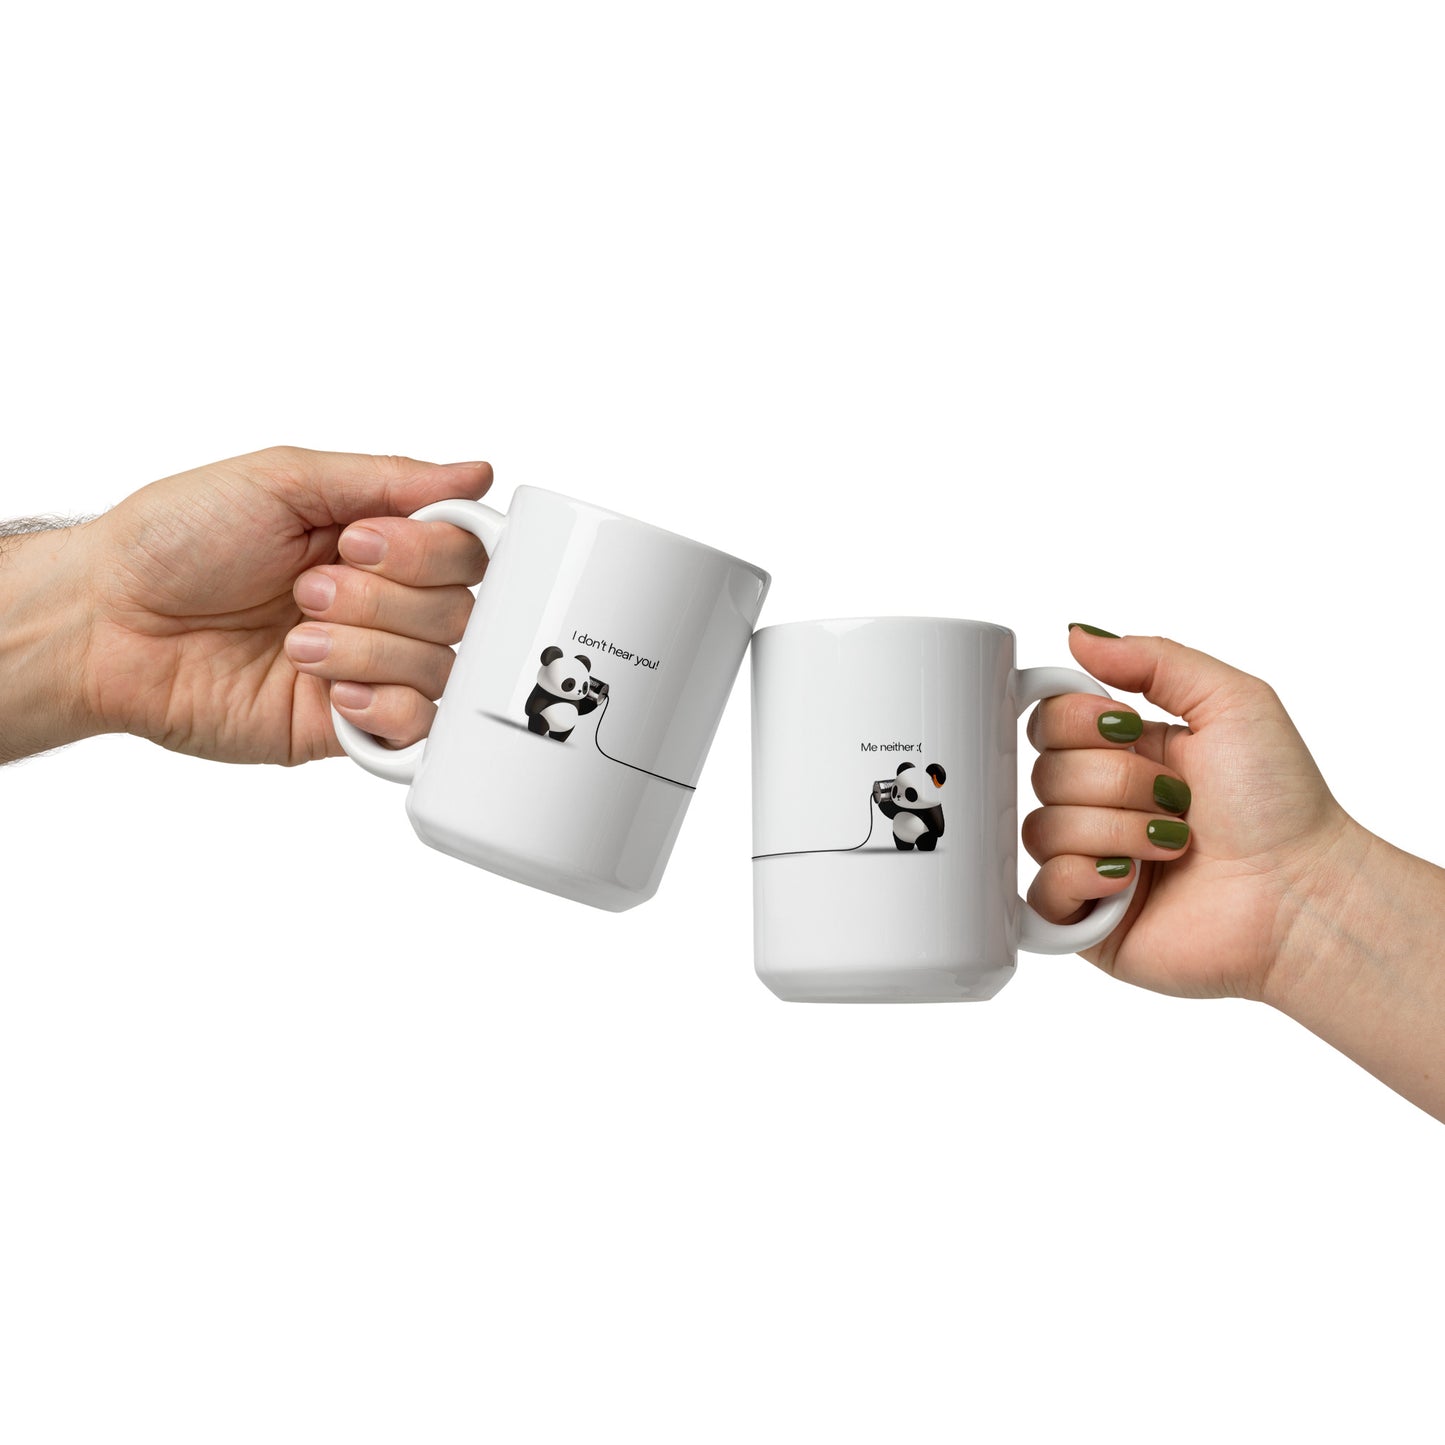 2 Little Pandas talking with each other on White glossy mug